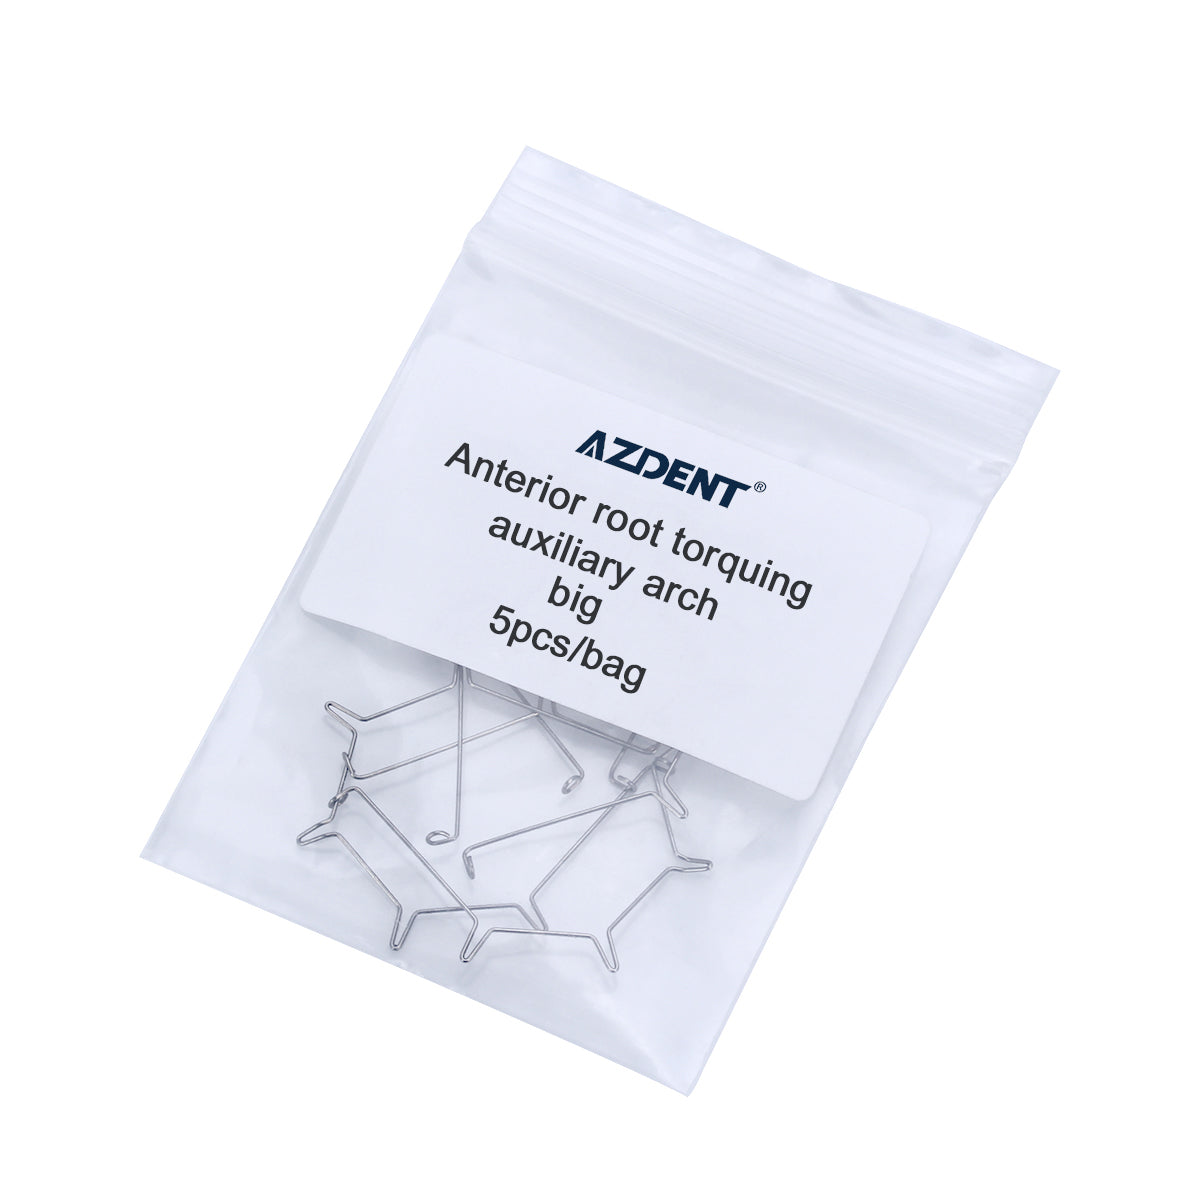 AZDENT Anterior Root Torquing Auxiliary Arch Big 5/Bag